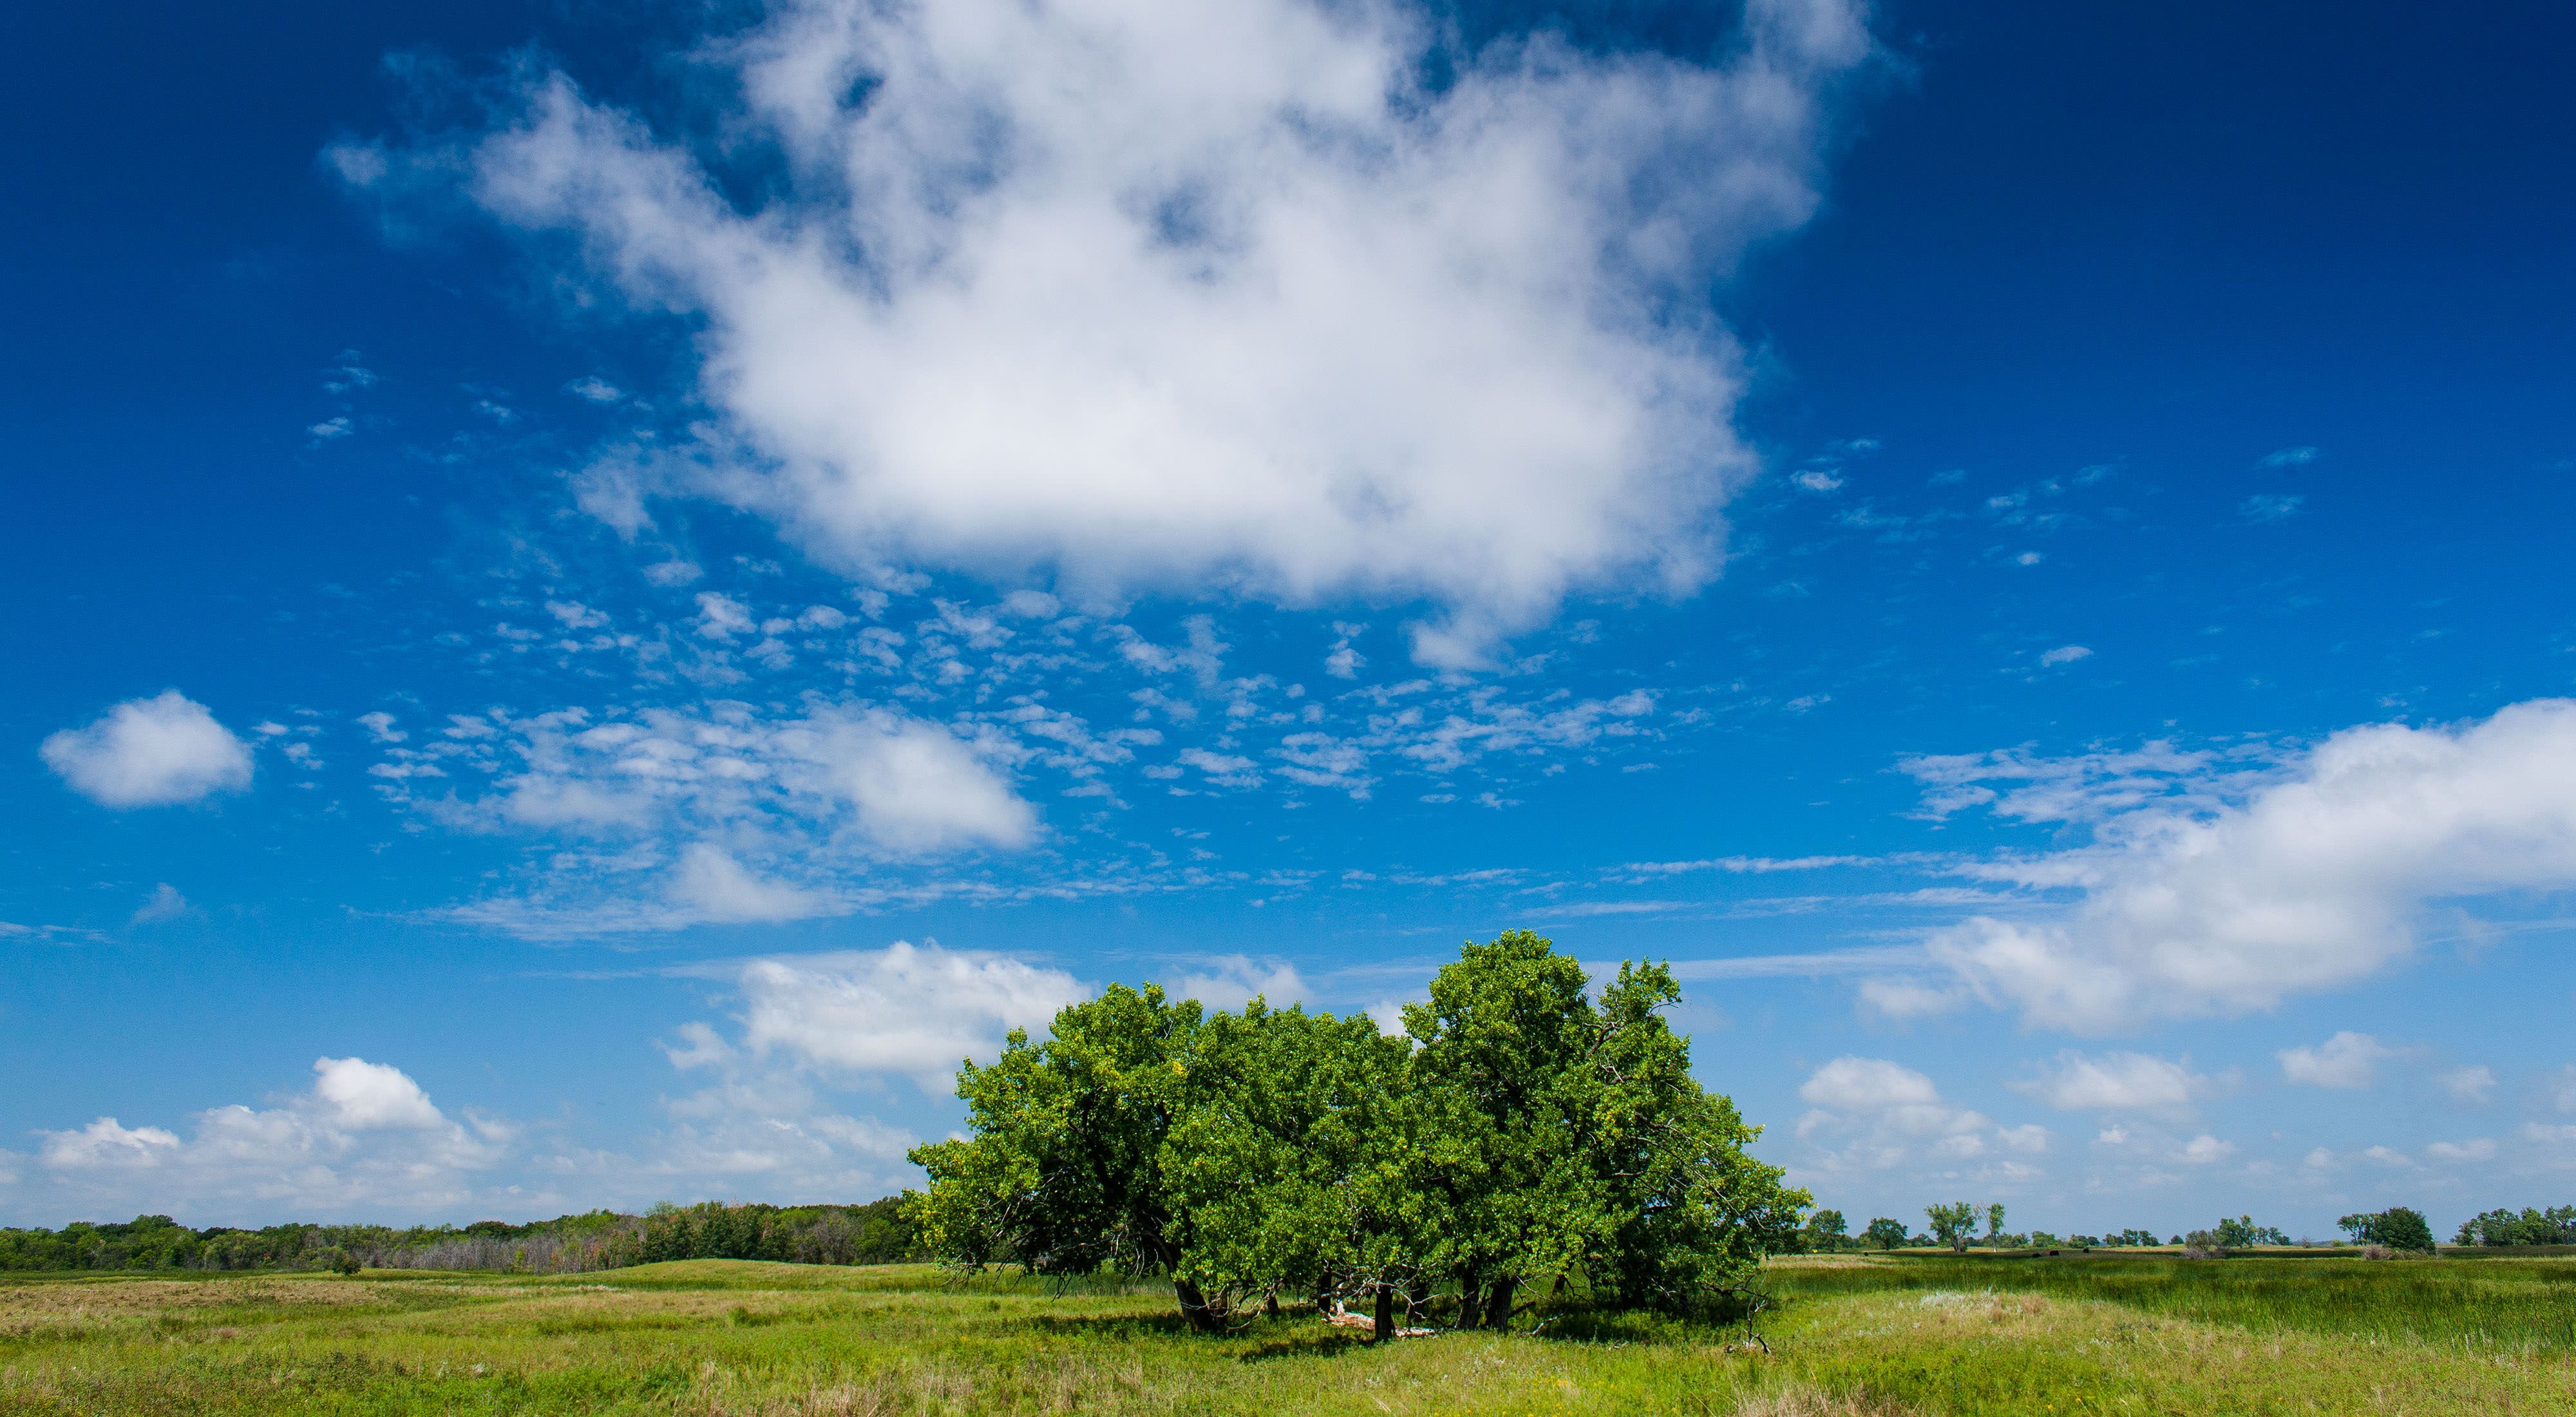 A clump of trees standing in the middle of a green field with bright blue skies overhead dotted with a few white clouds.